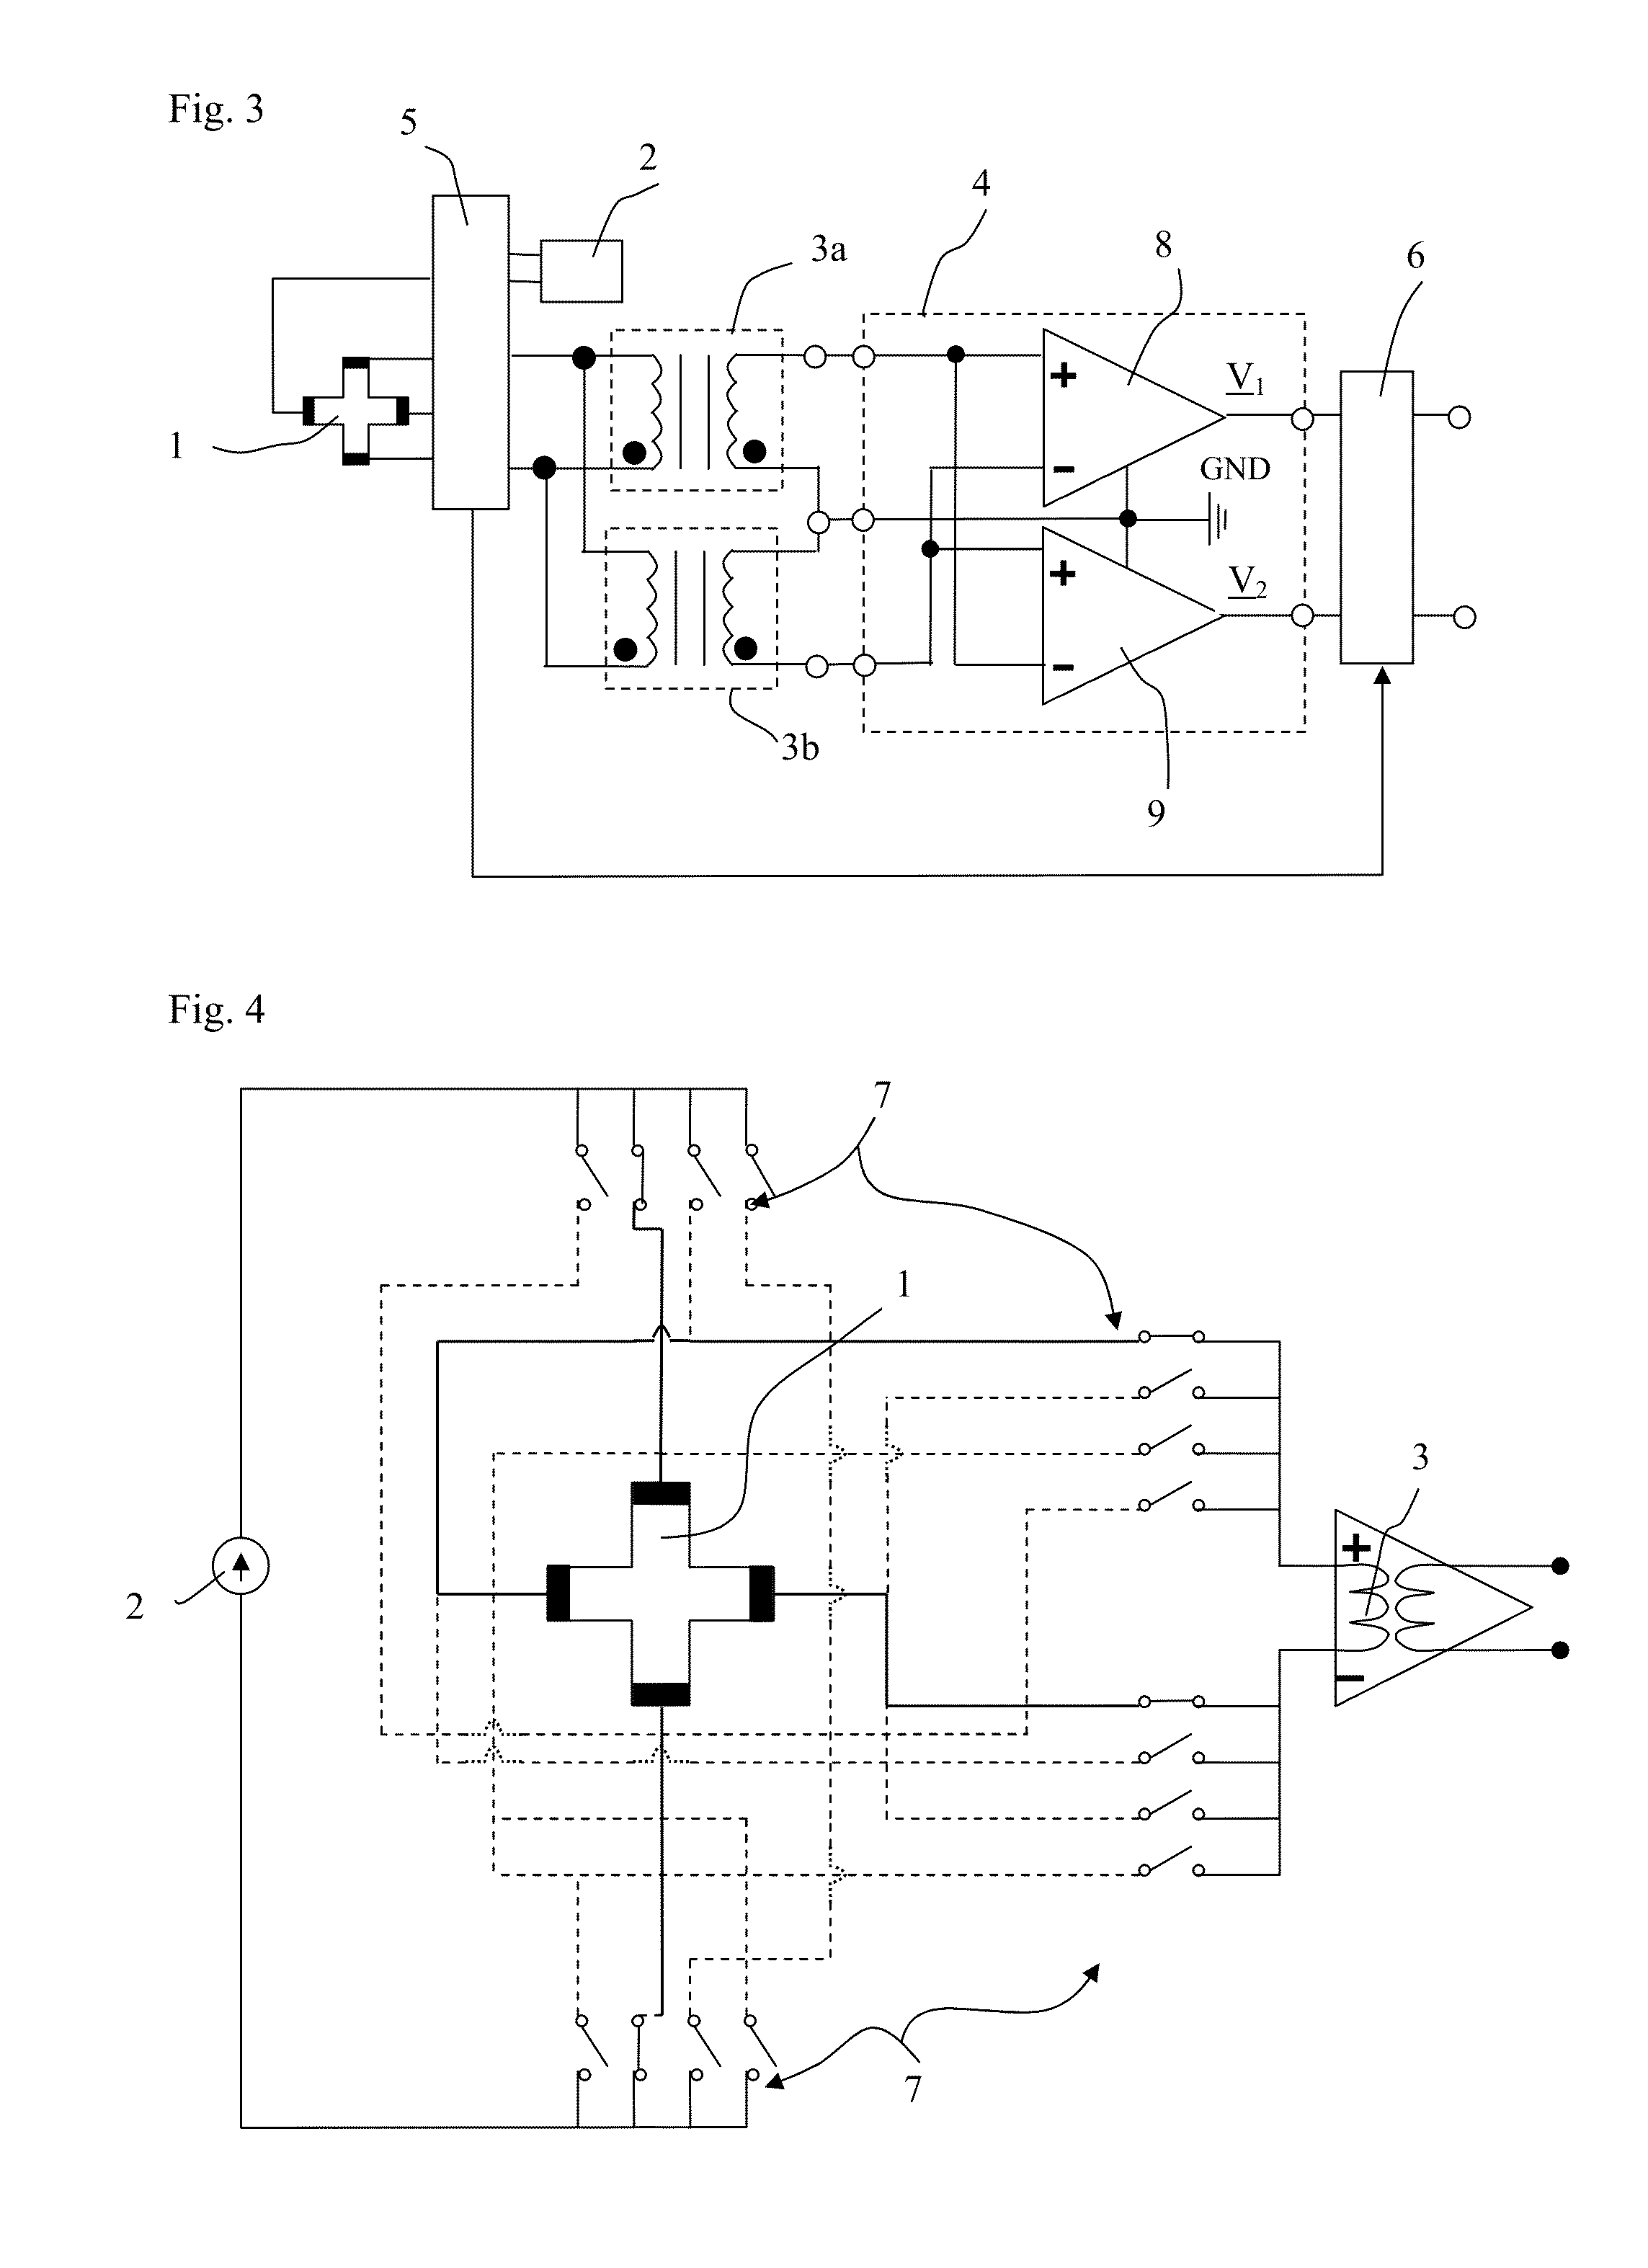 Current Transducer For Measuring An Electrical Current